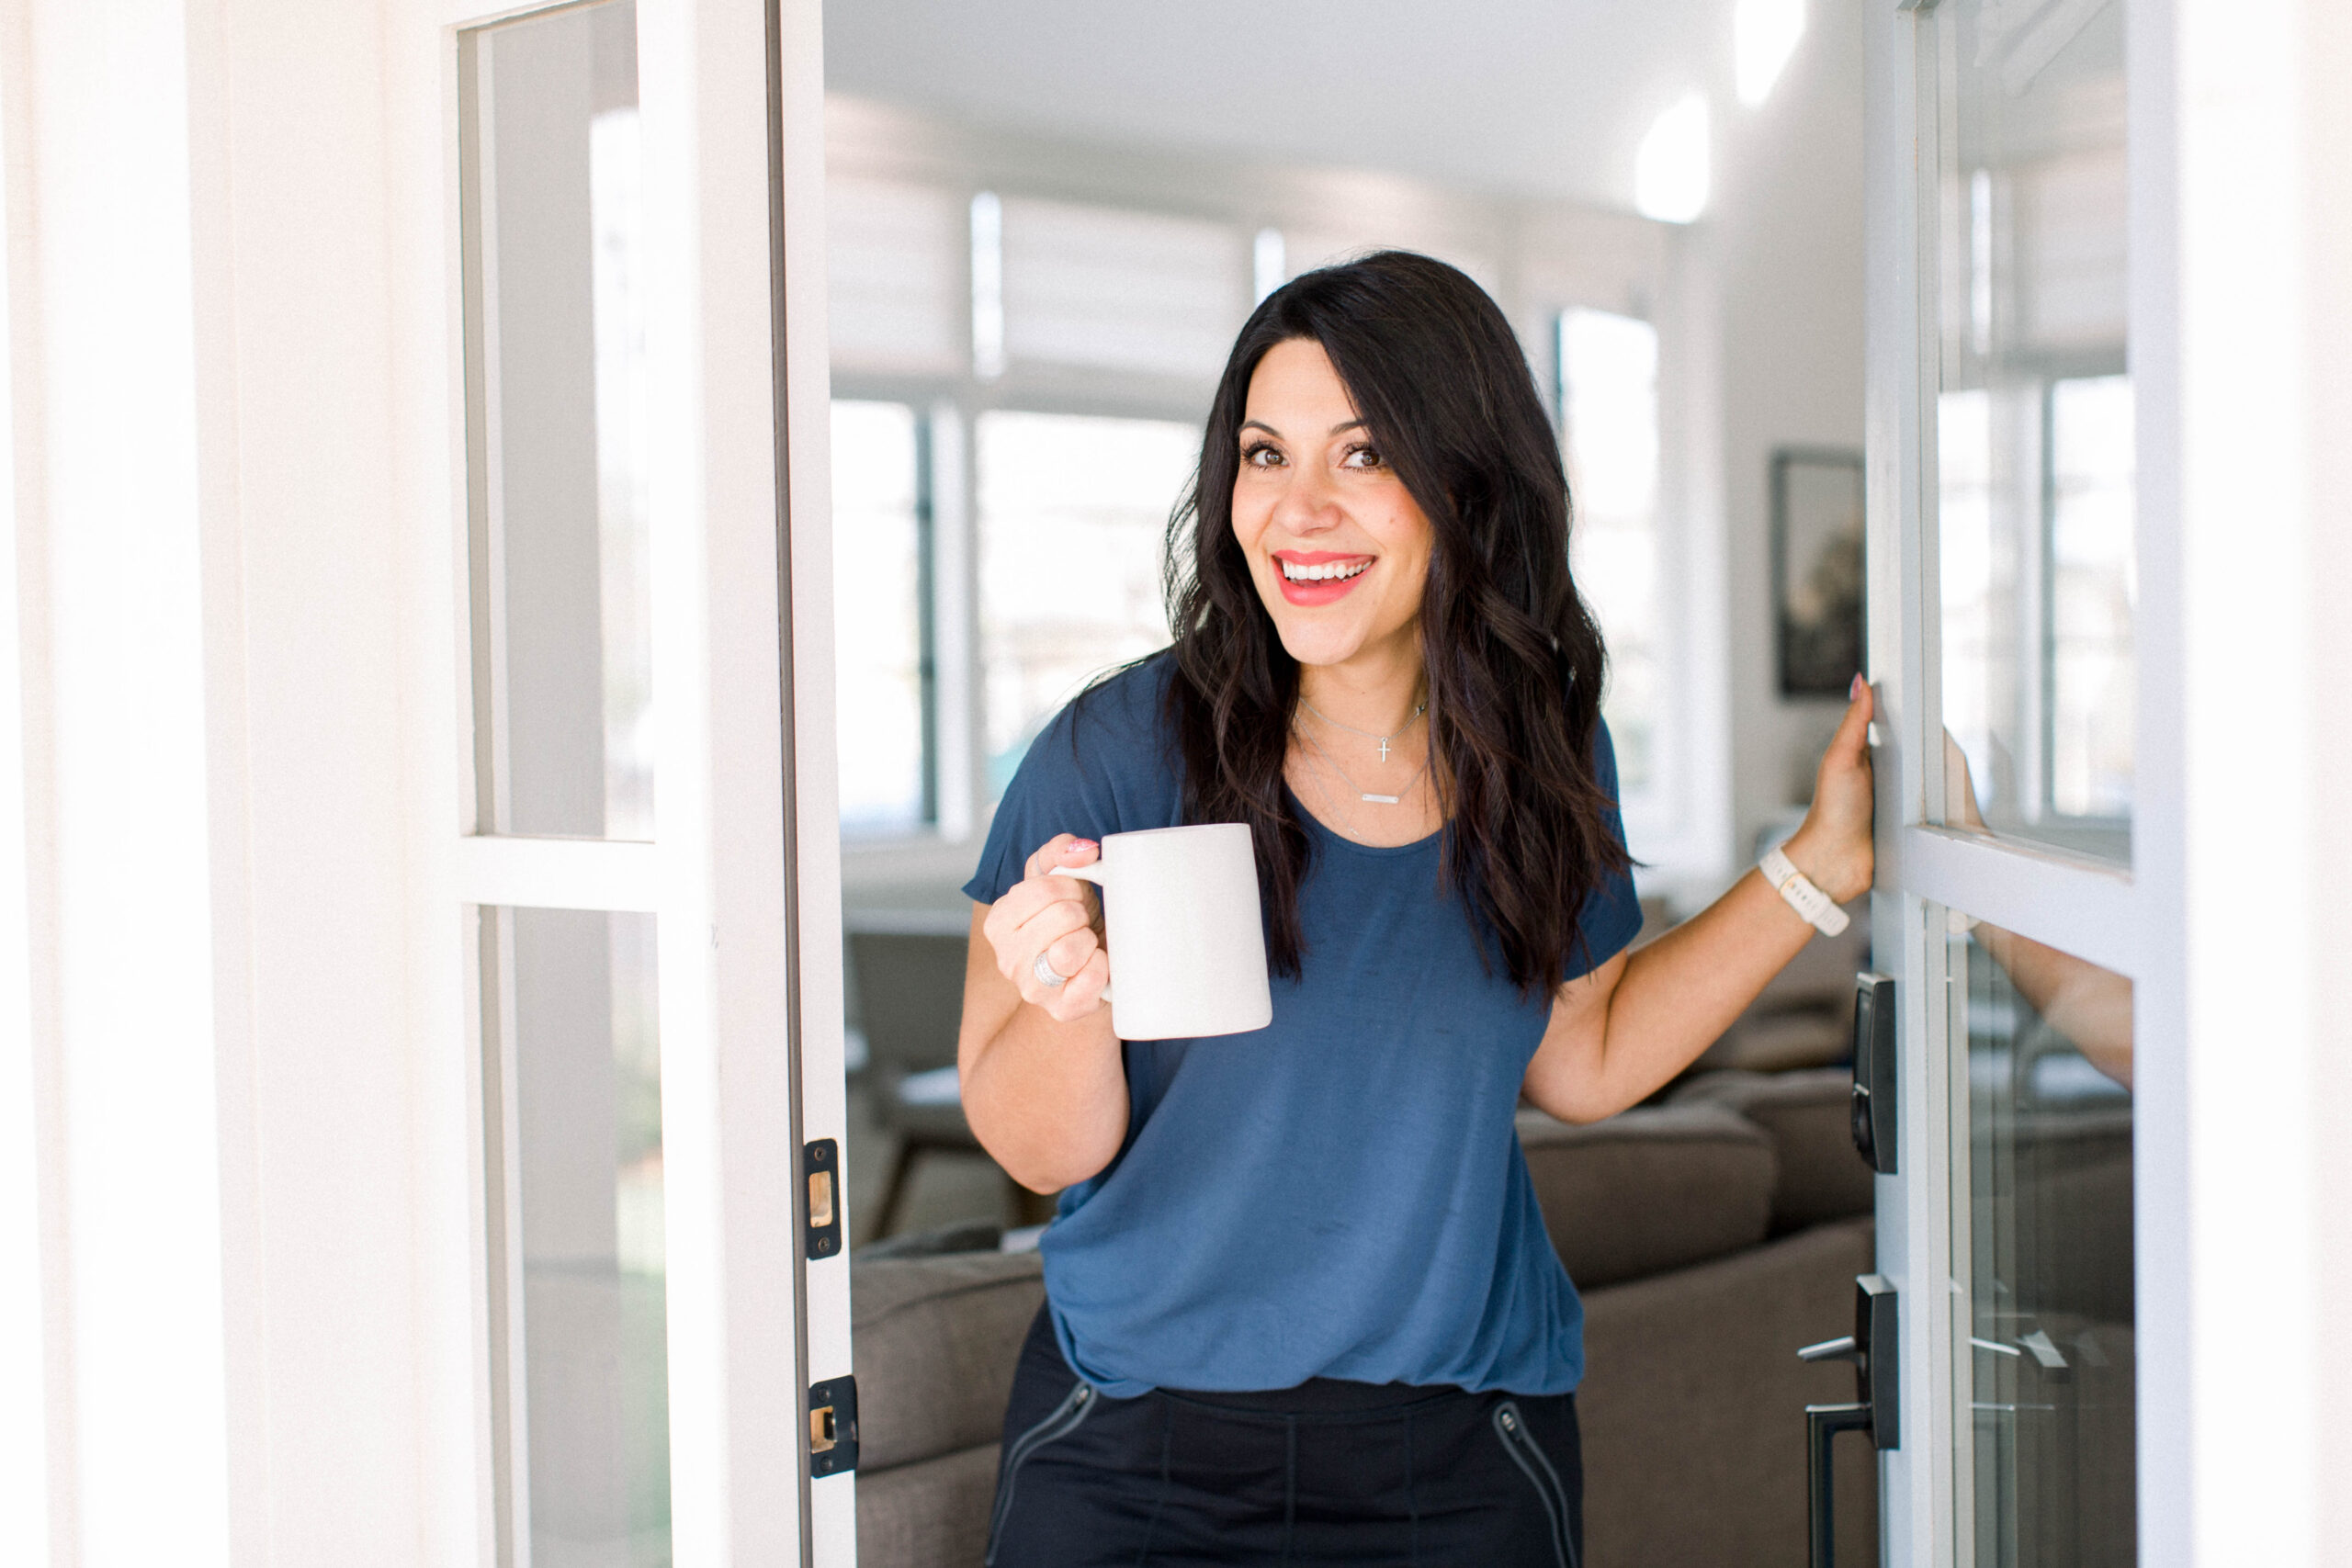 dark haired woman standing in a doorway. She has her left hand on the edge of the door and is holding a white mug in her right hand. She is wearing a blue blouse and black jeans. She is smiling at the camera.